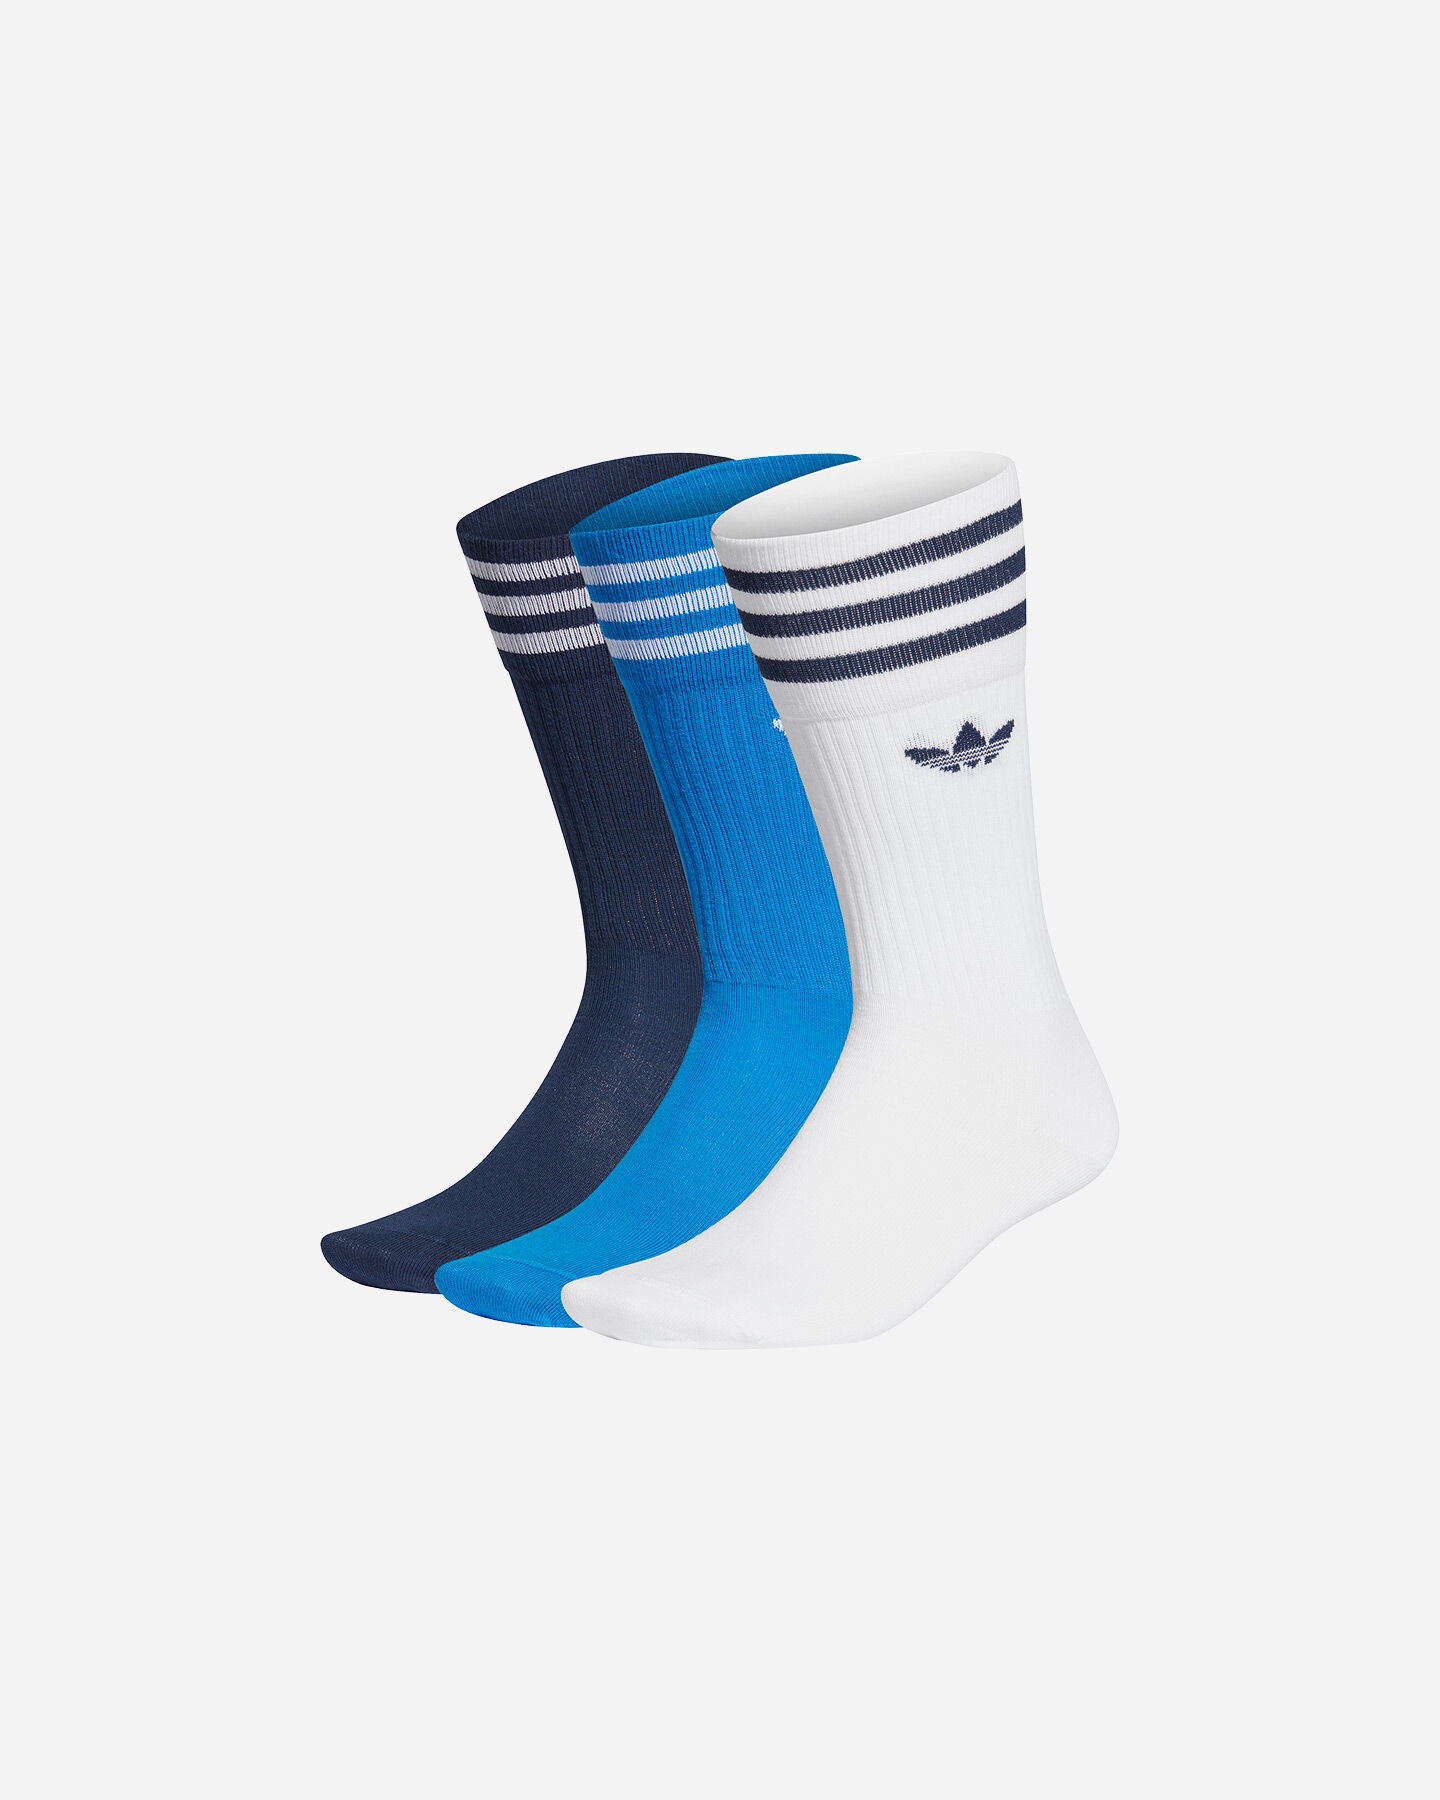  Calze ADIDAS SOLID CREW 3 PACK M S5210474|UNI|3134 scatto 0